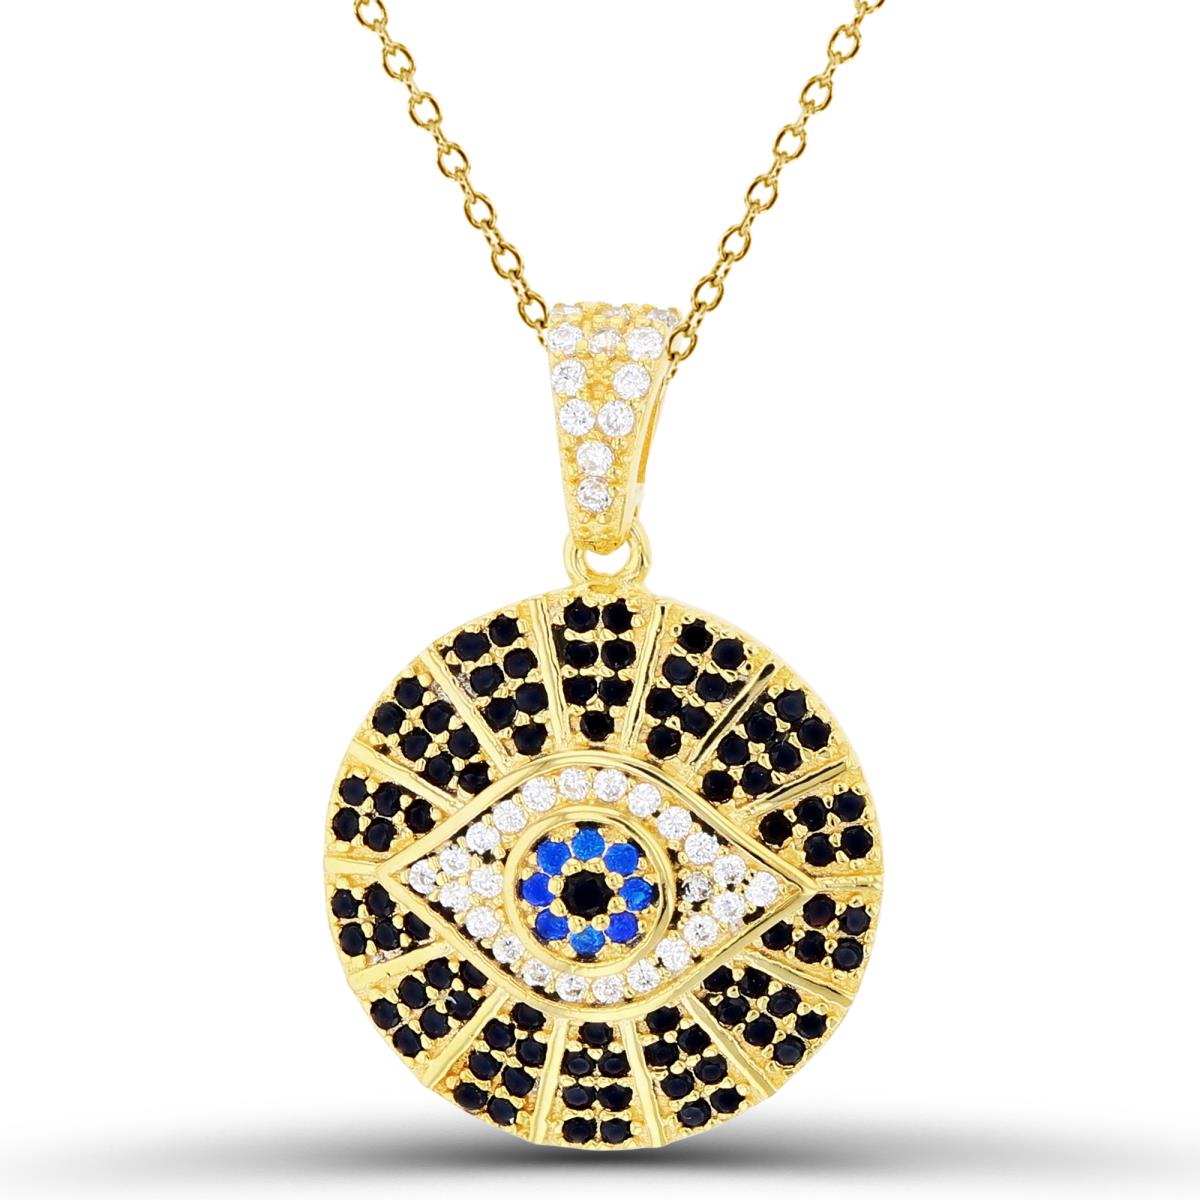 Sterling Silver+1Micron Yellow Gold Rnd #113 Blue Spinel & Rnd White /Black CZ Evil Eye in Circle 18"Necklace